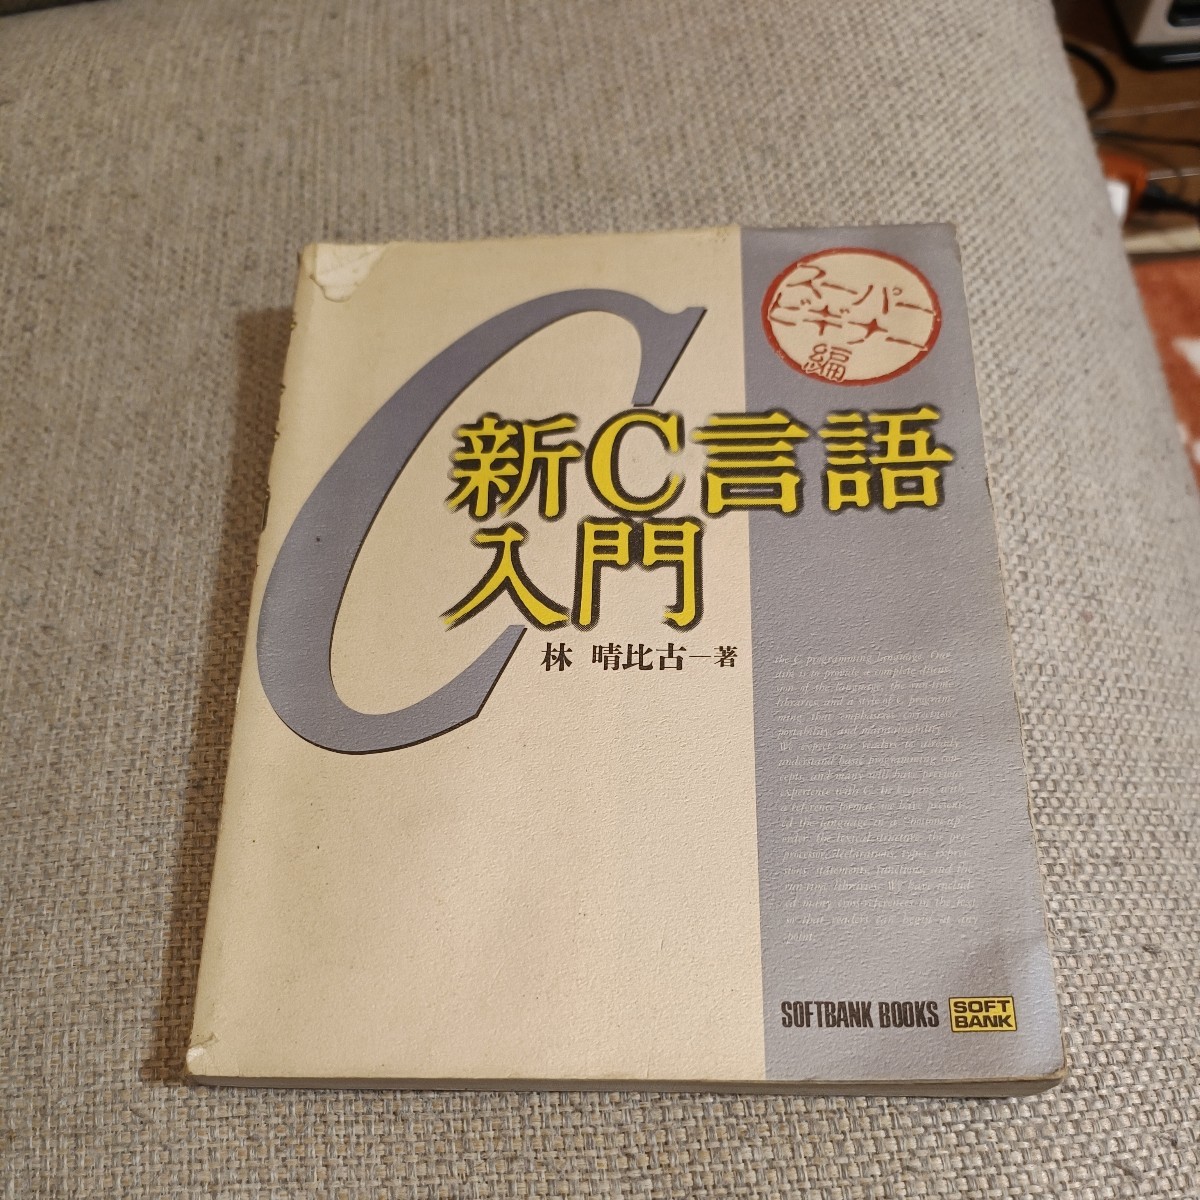  new C language introduction * super beginner compilation *.. ratio old [ work ]*C language practical use master series * SoftBank * postage cheap!3cm within shipping possible!